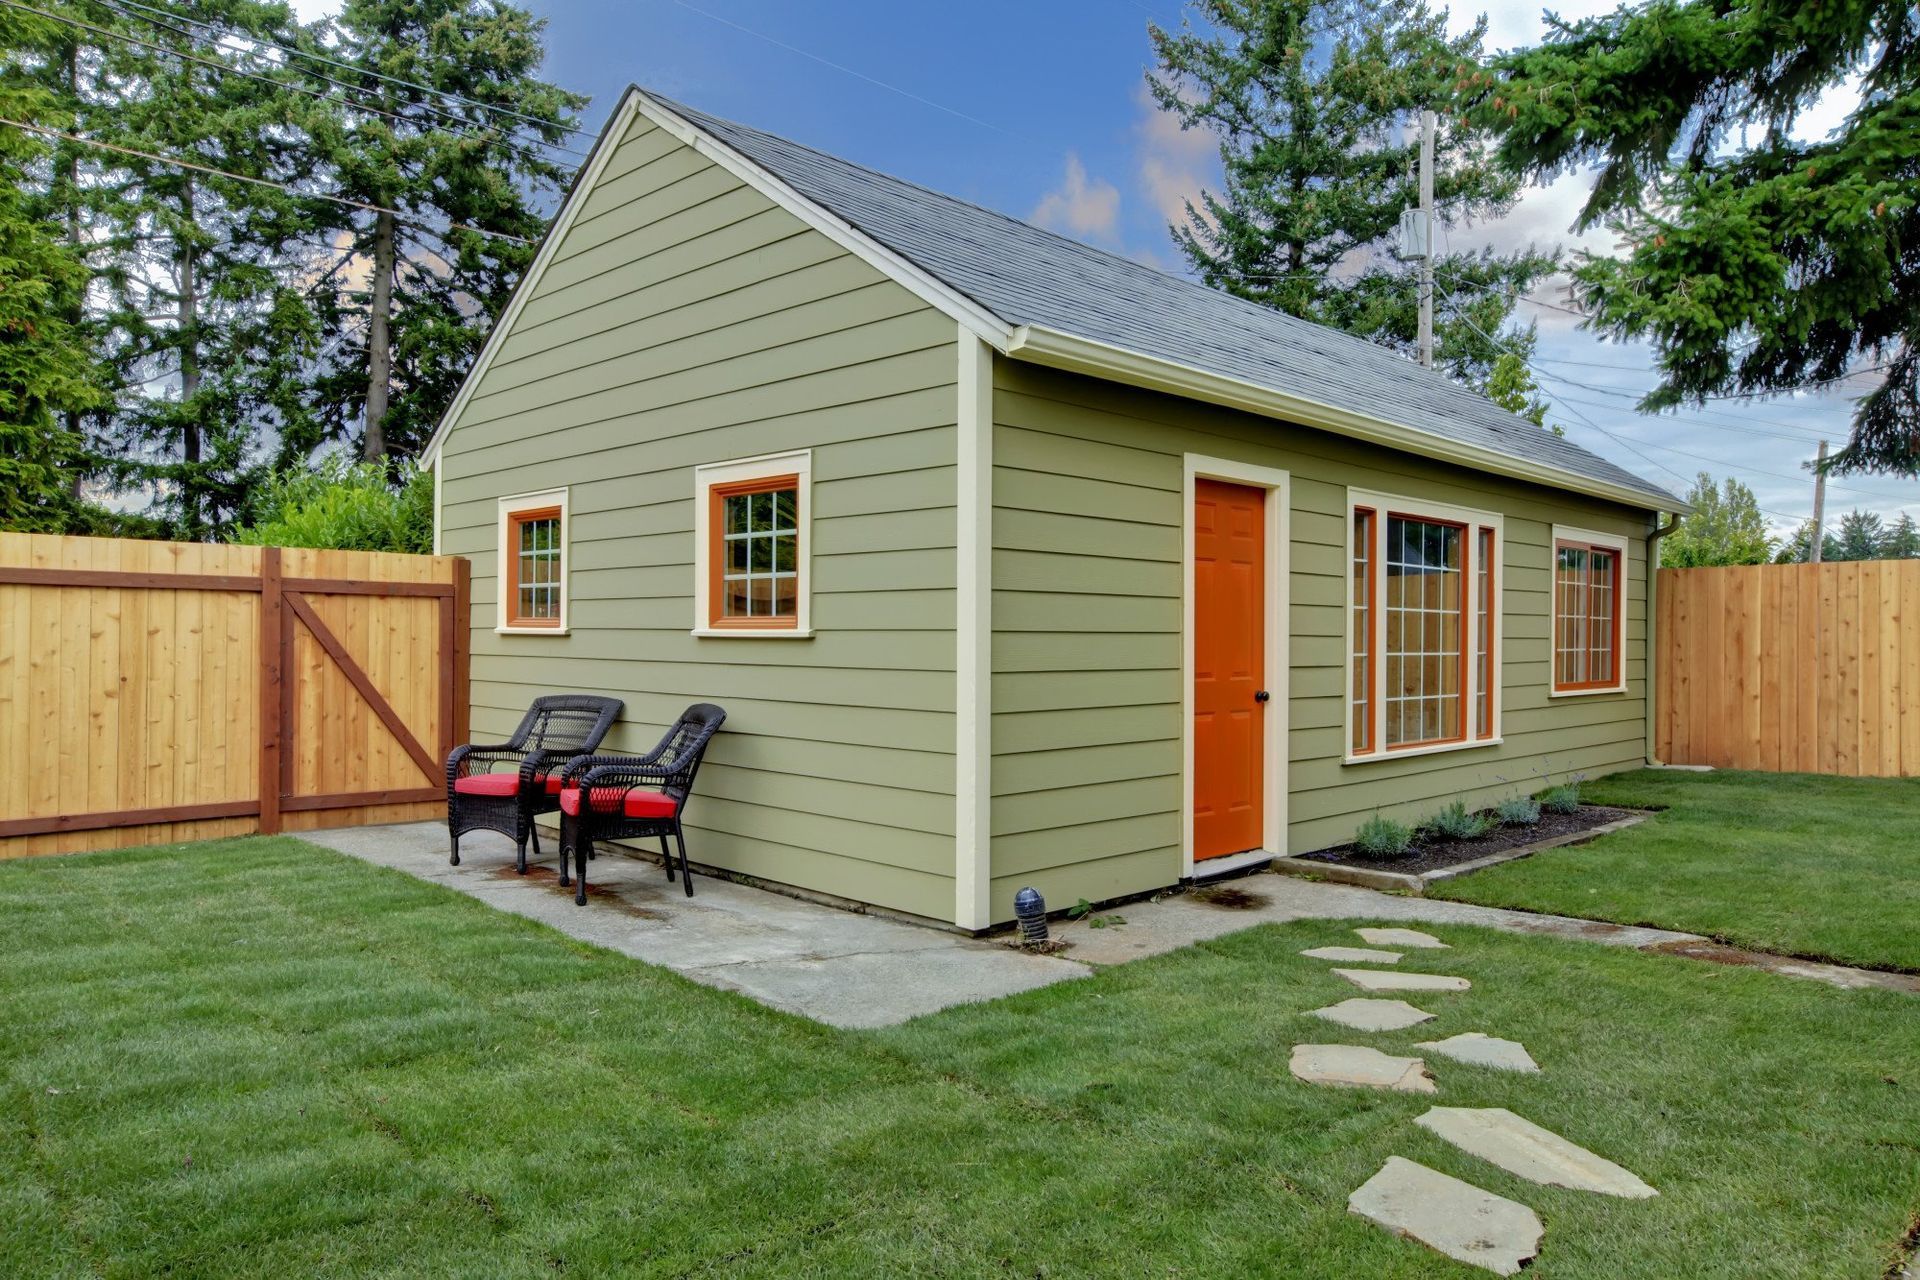 What Are the Different Types of Accessory Dwelling Units?